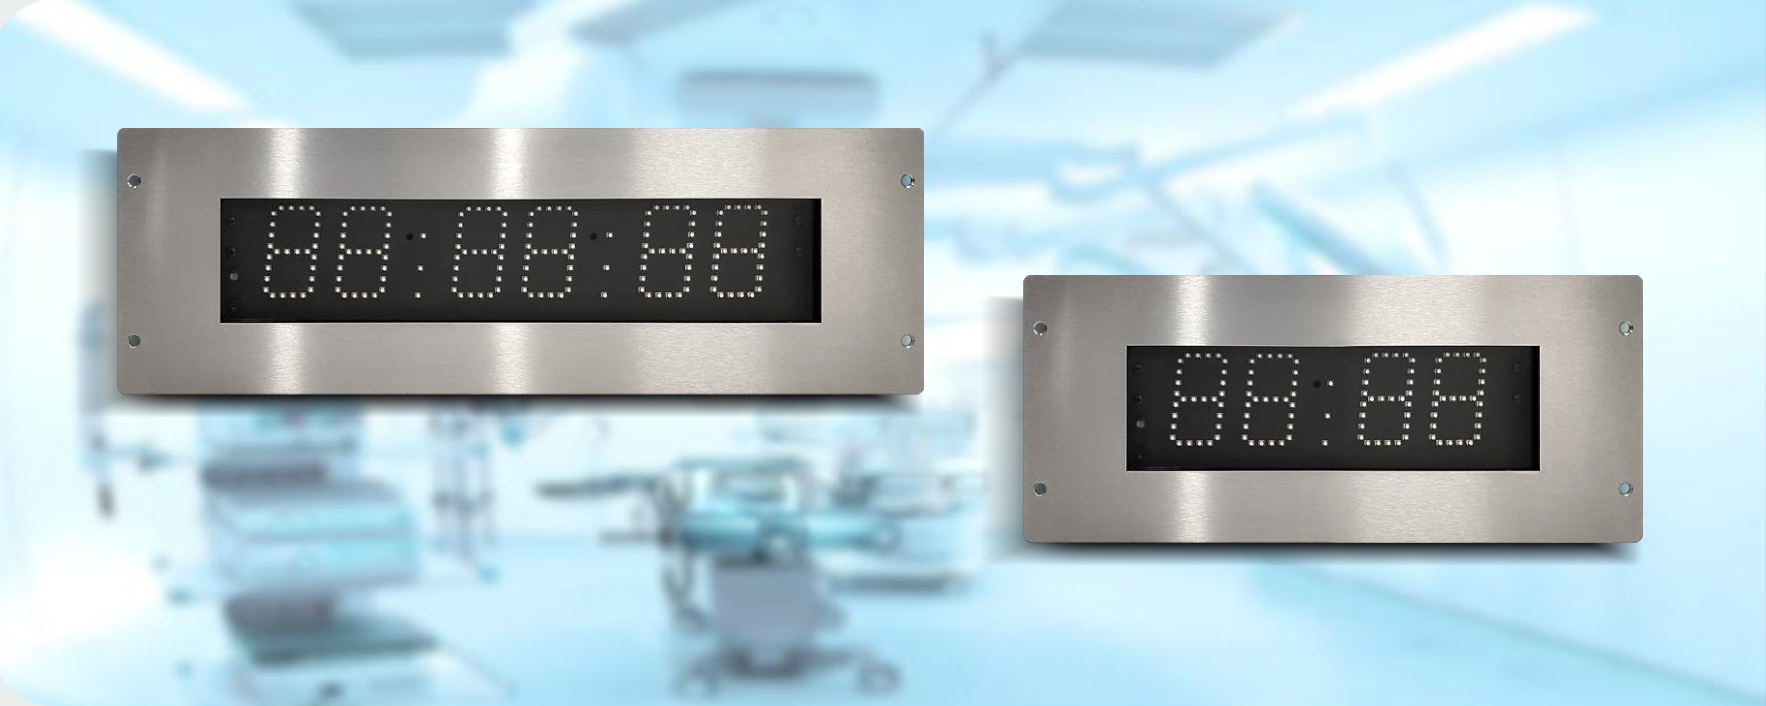 Flush Mount Clocks ZAM5-L PoE & ZBM5-L PoE for operating theatres, laboratories and other clean room environments